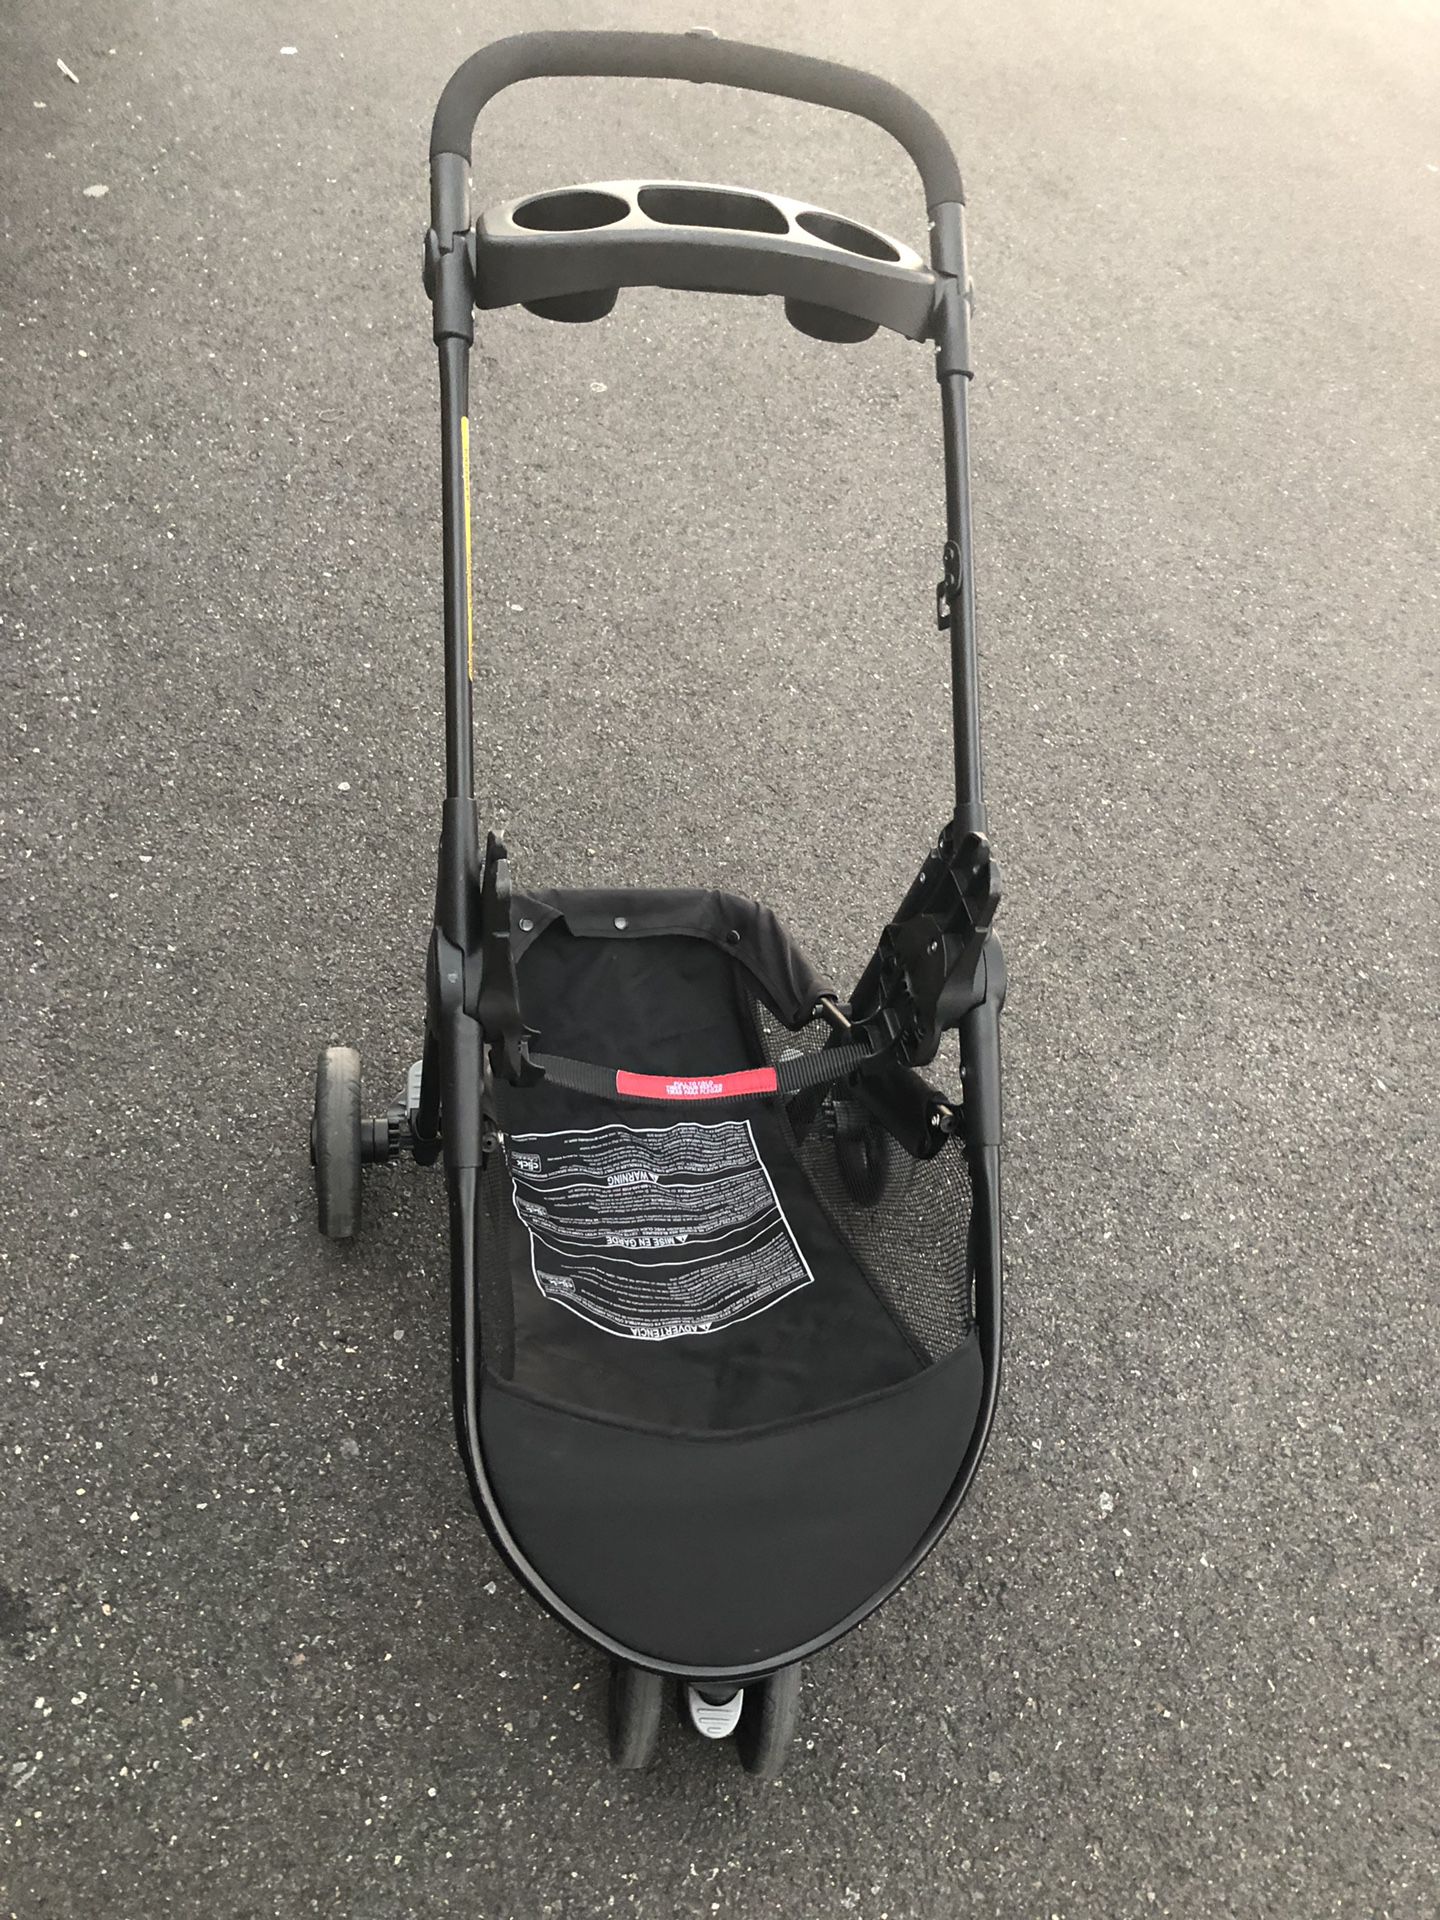 Graco Click and Go Stroller